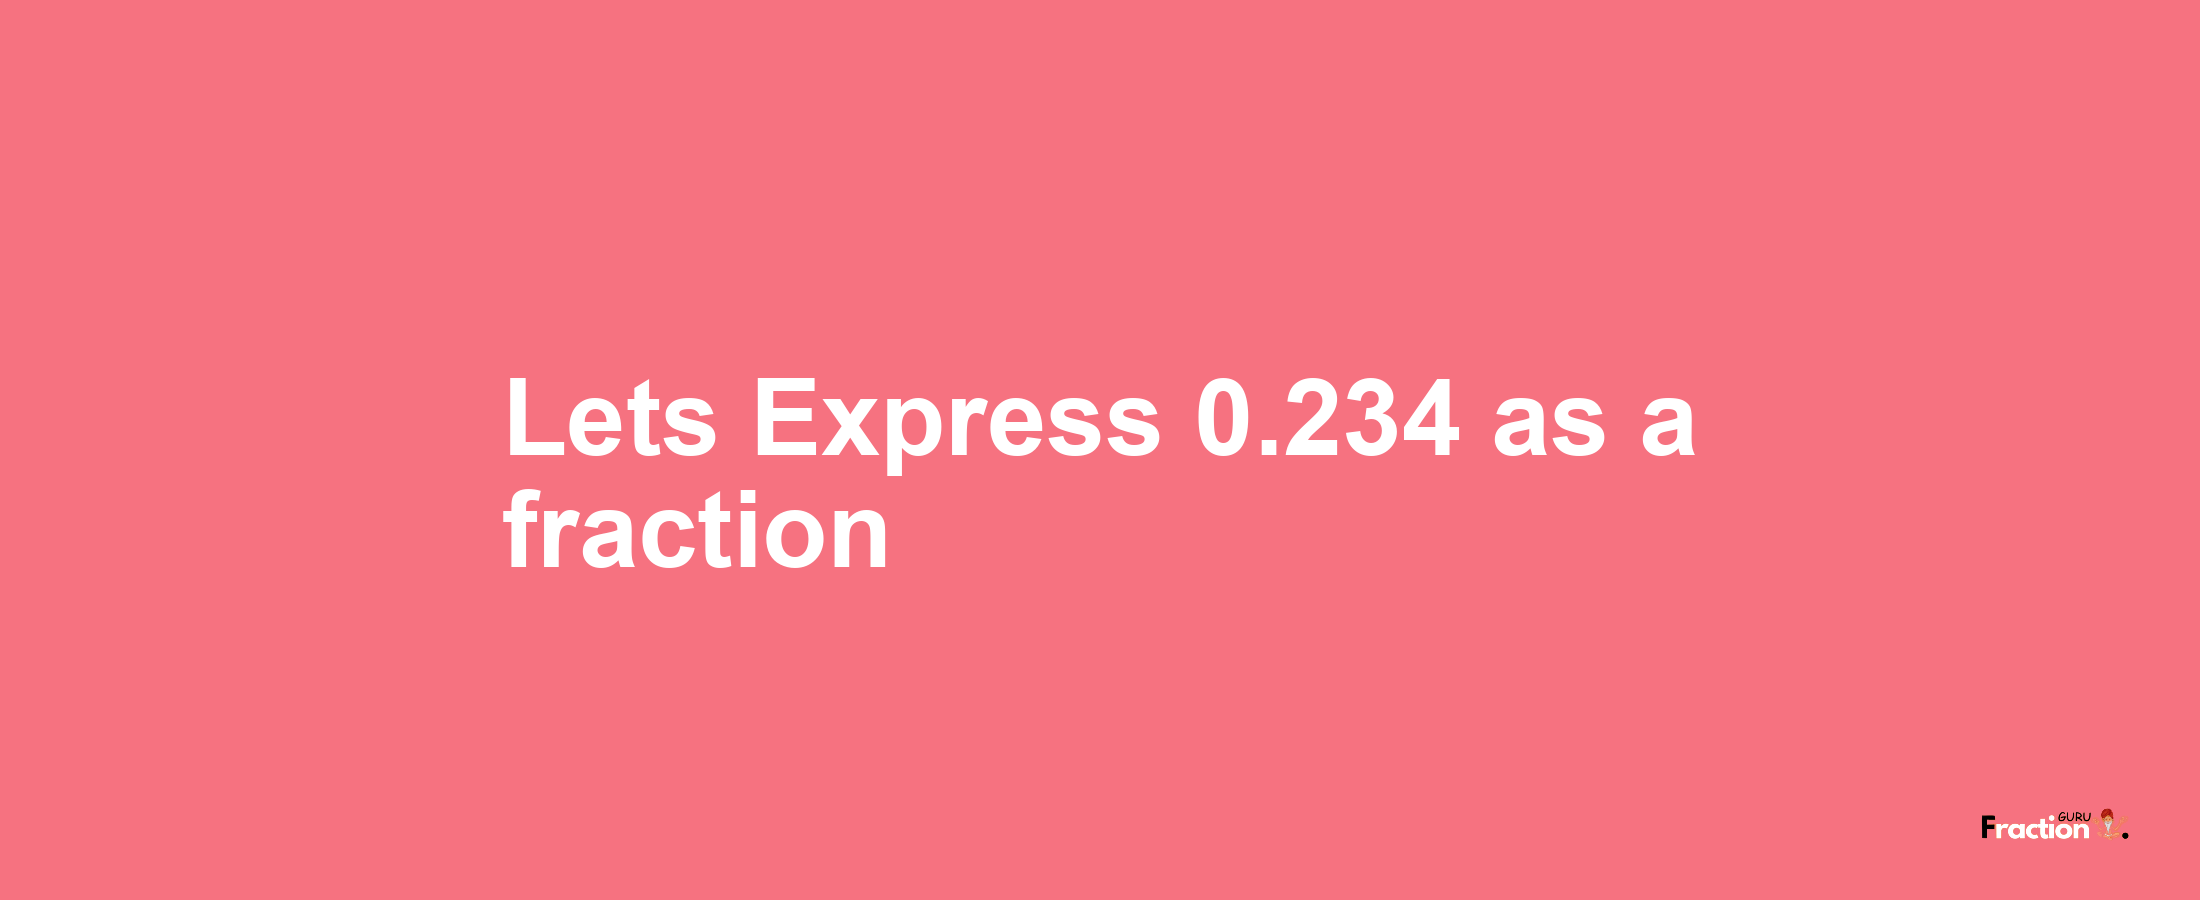 Lets Express 0.234 as afraction